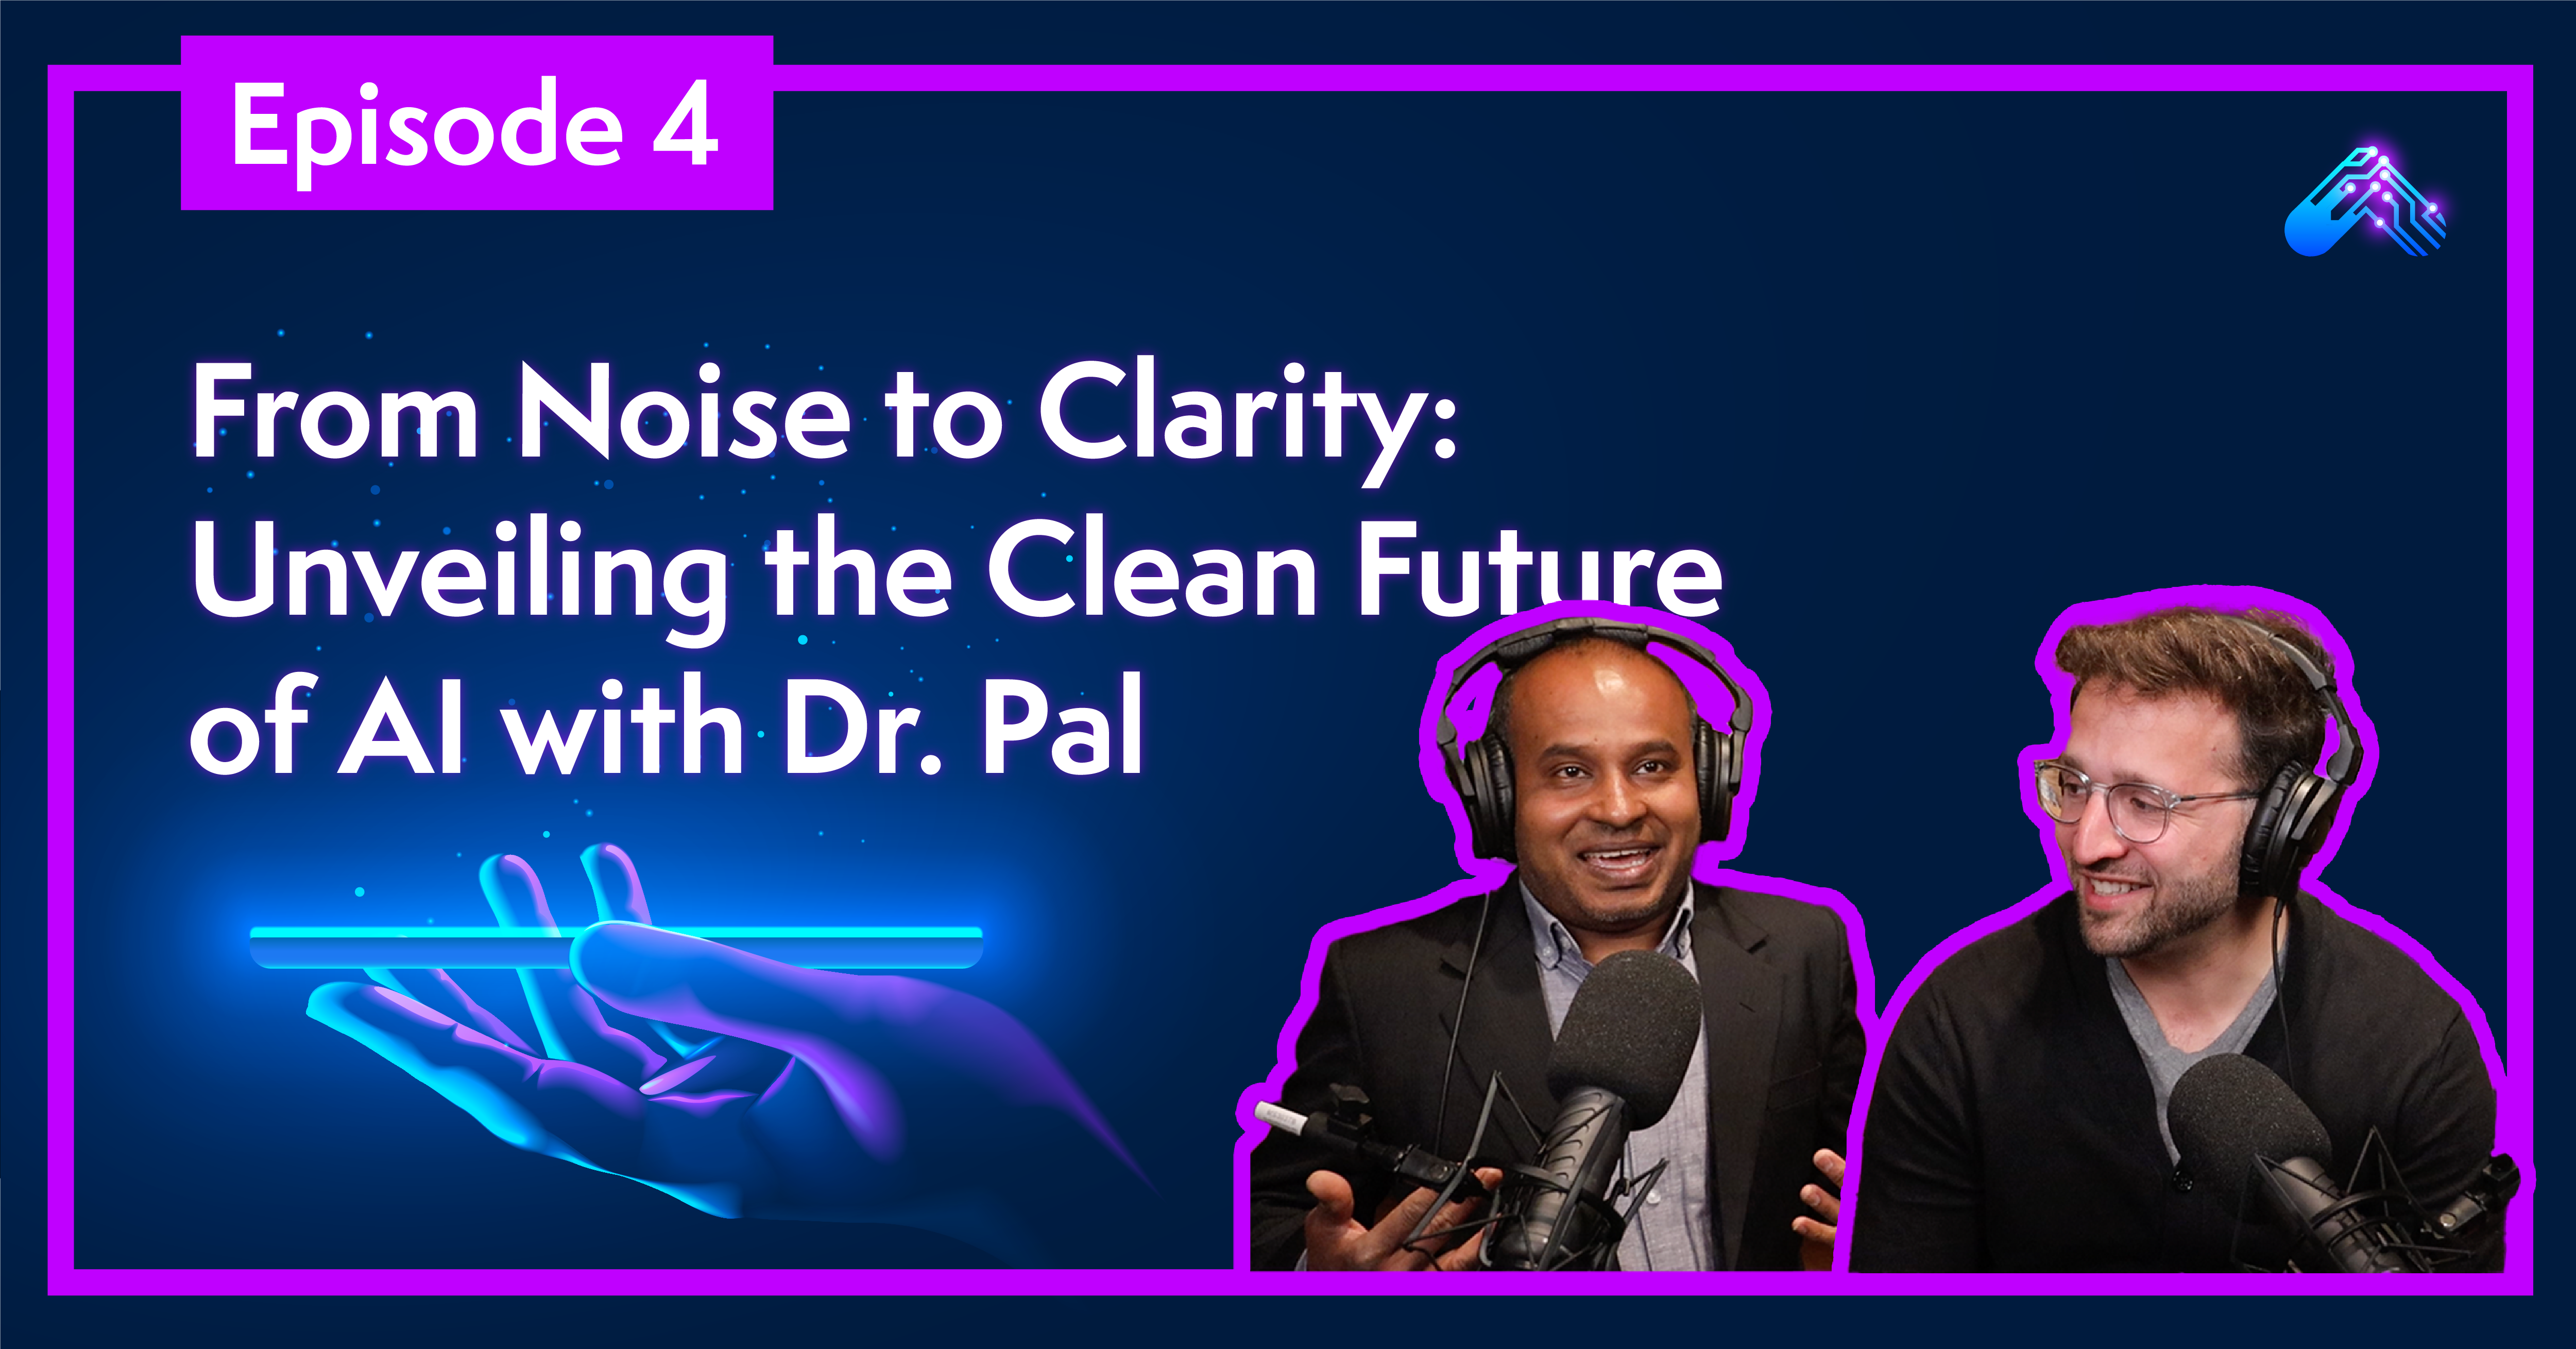 From Noise to Clarity: Unveiling the Clean Future of AI with Dr. Pal